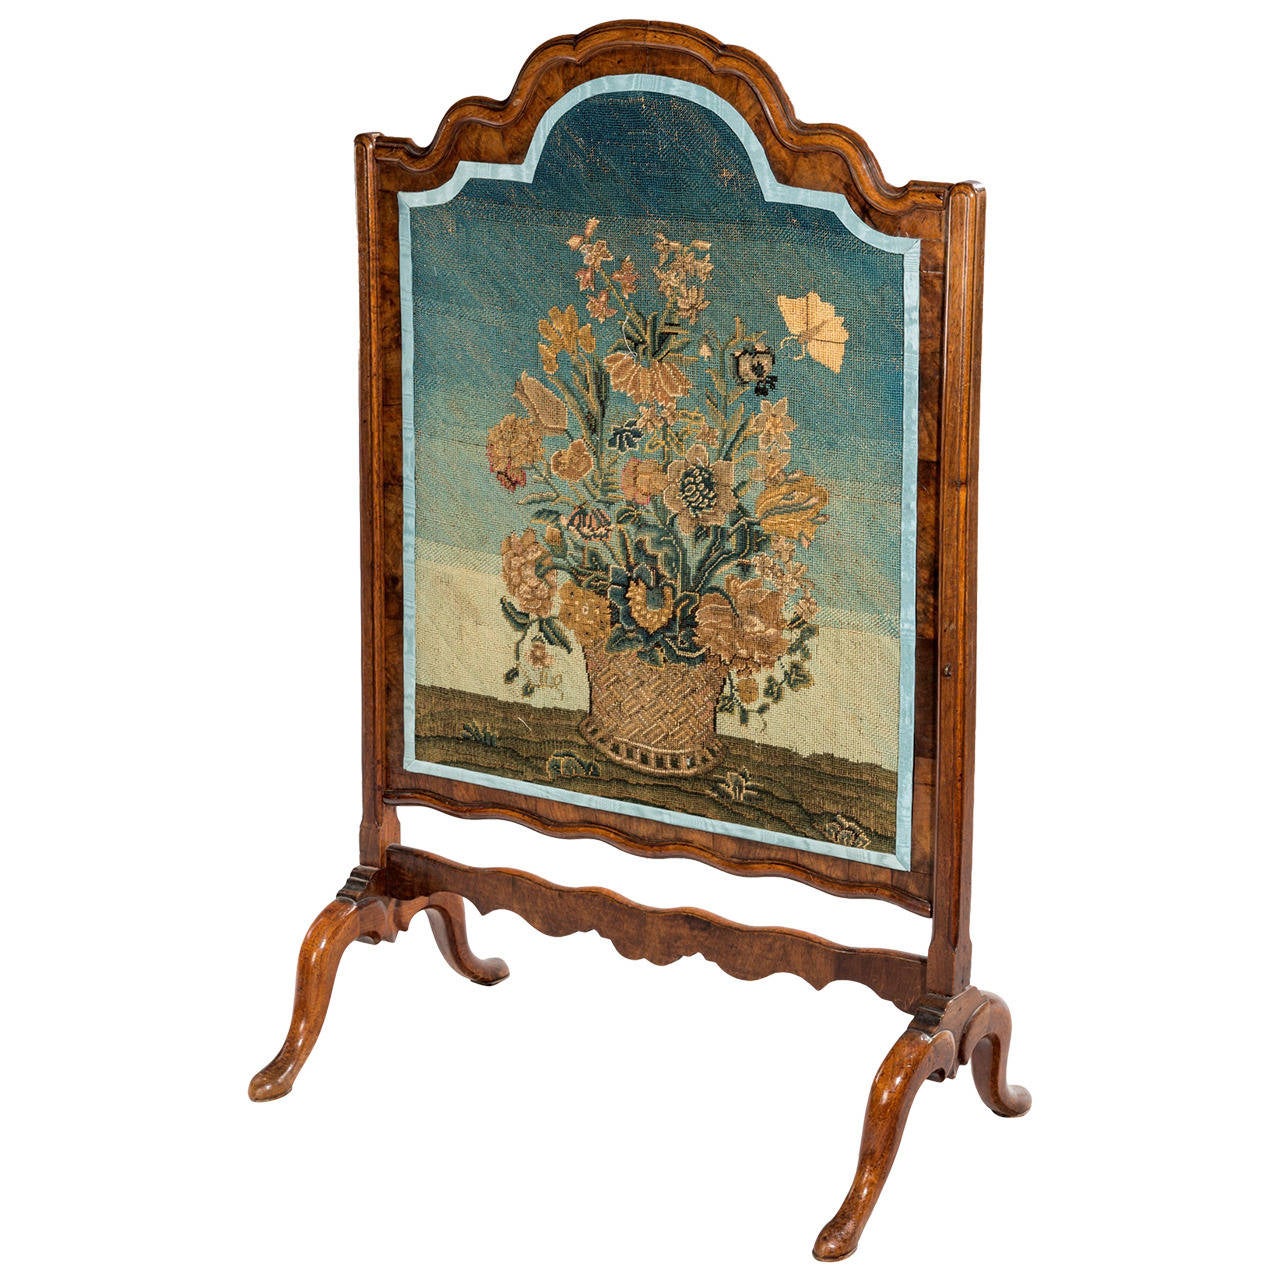 Antique fire screen For Sale at 1stdibs